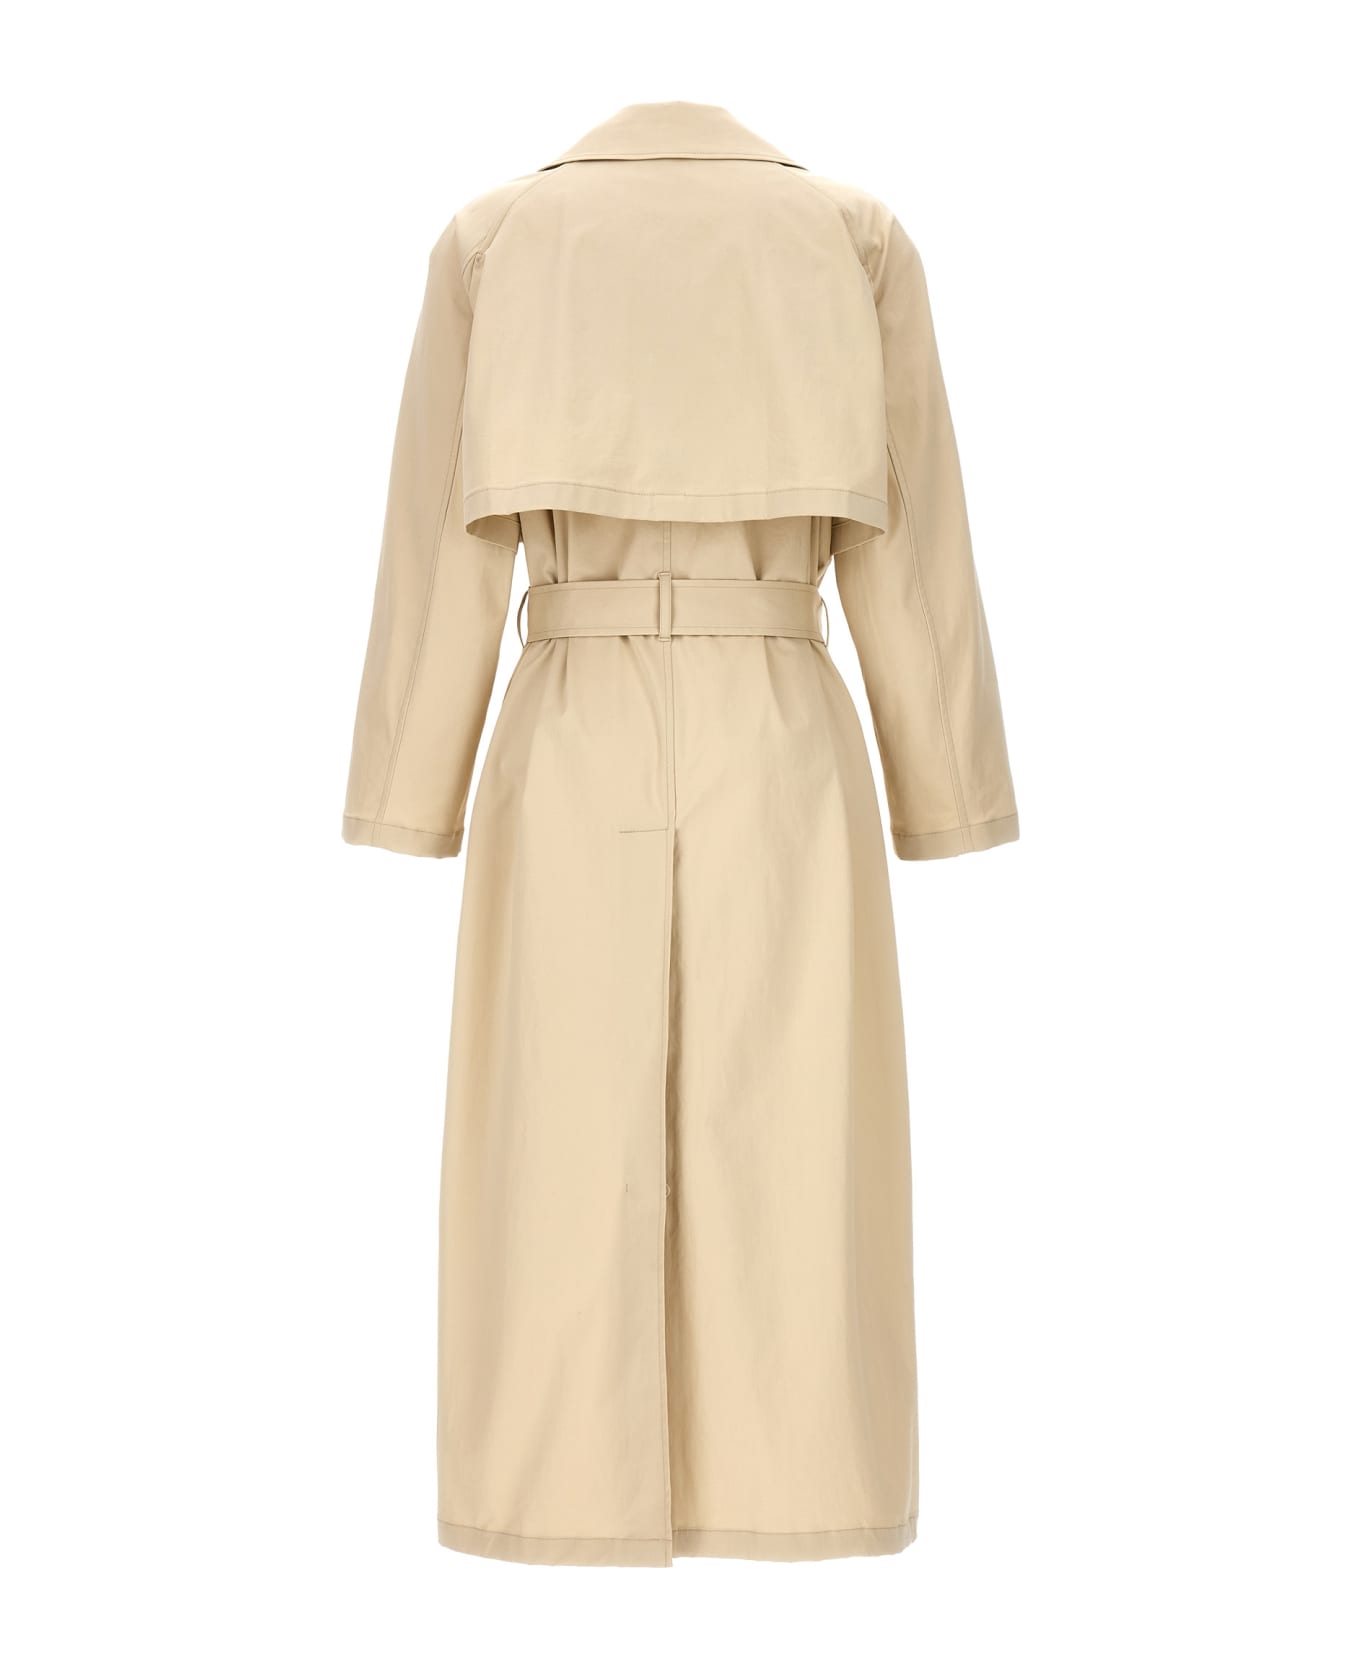 Theory Long Trench Coat - BEIGE